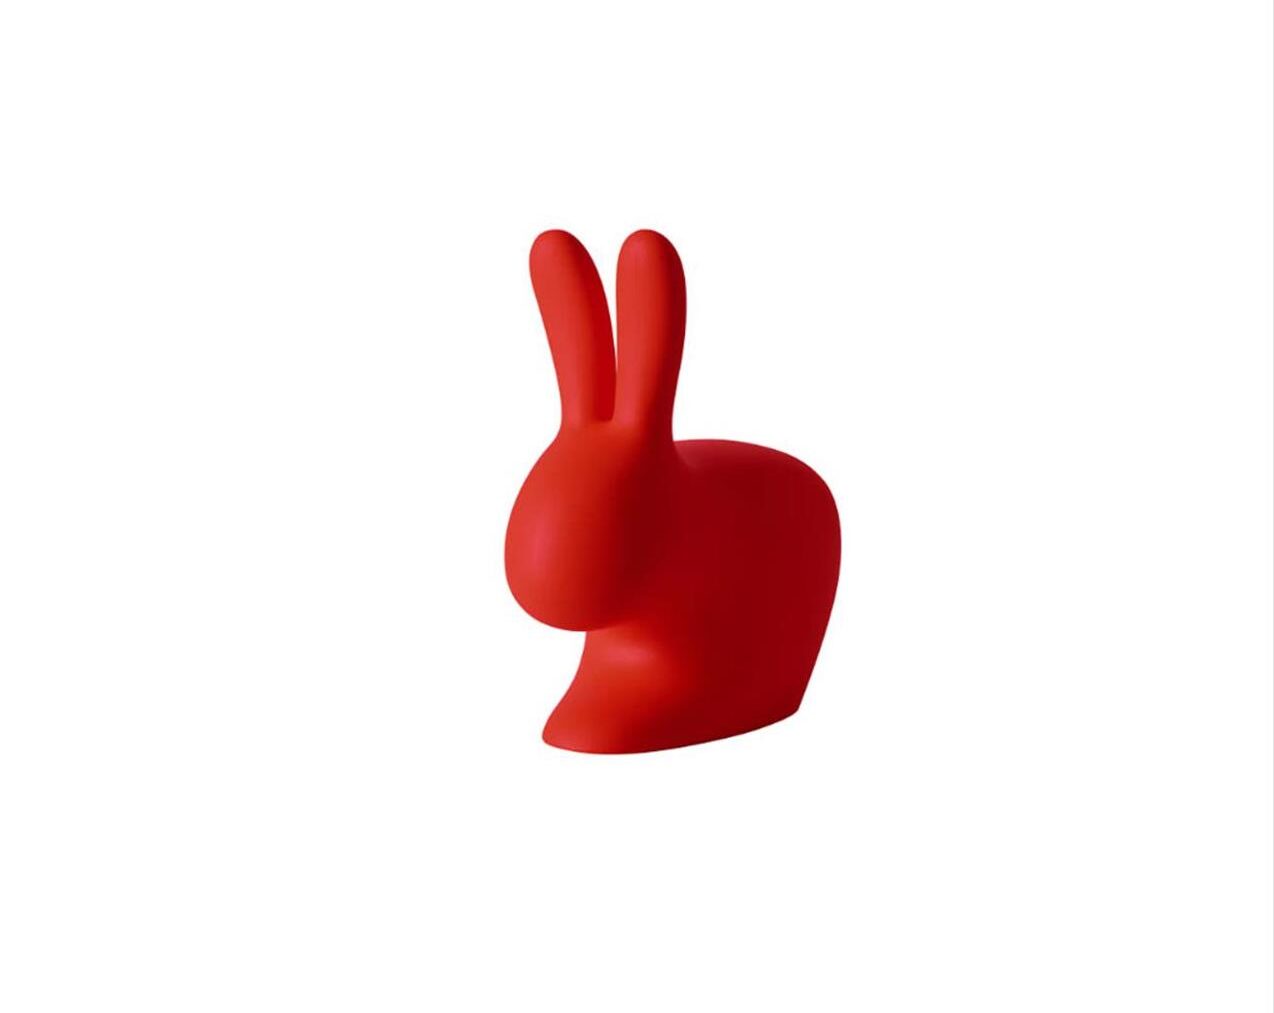 Rabbit-Chair-Baby-Red